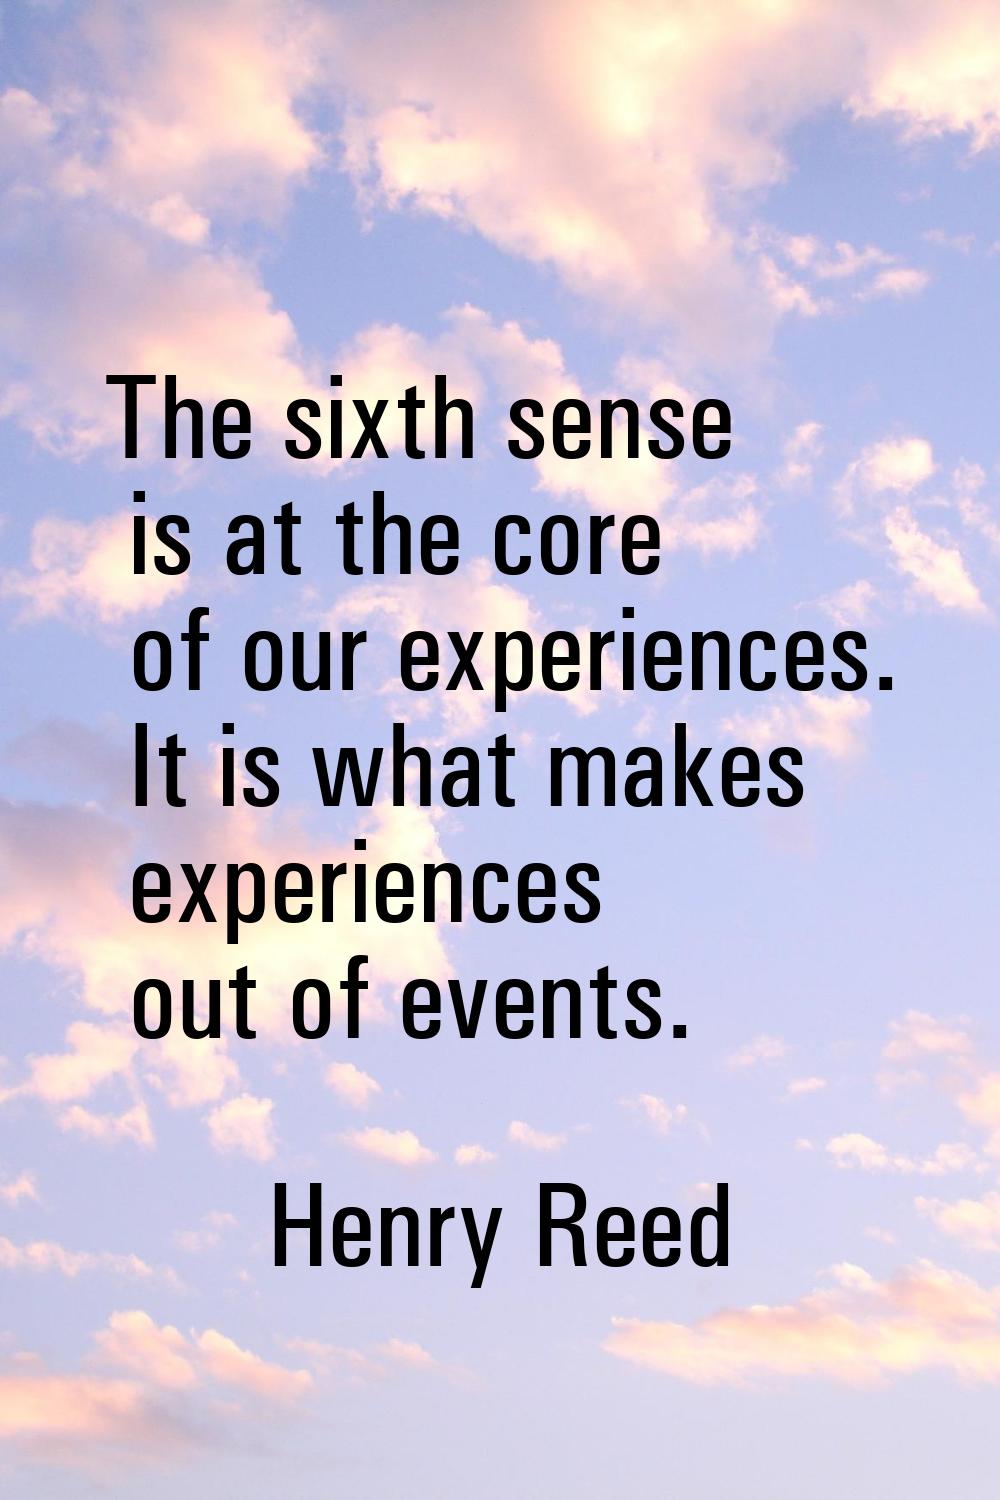 The sixth sense is at the core of our experiences. It is what makes experiences out of events.